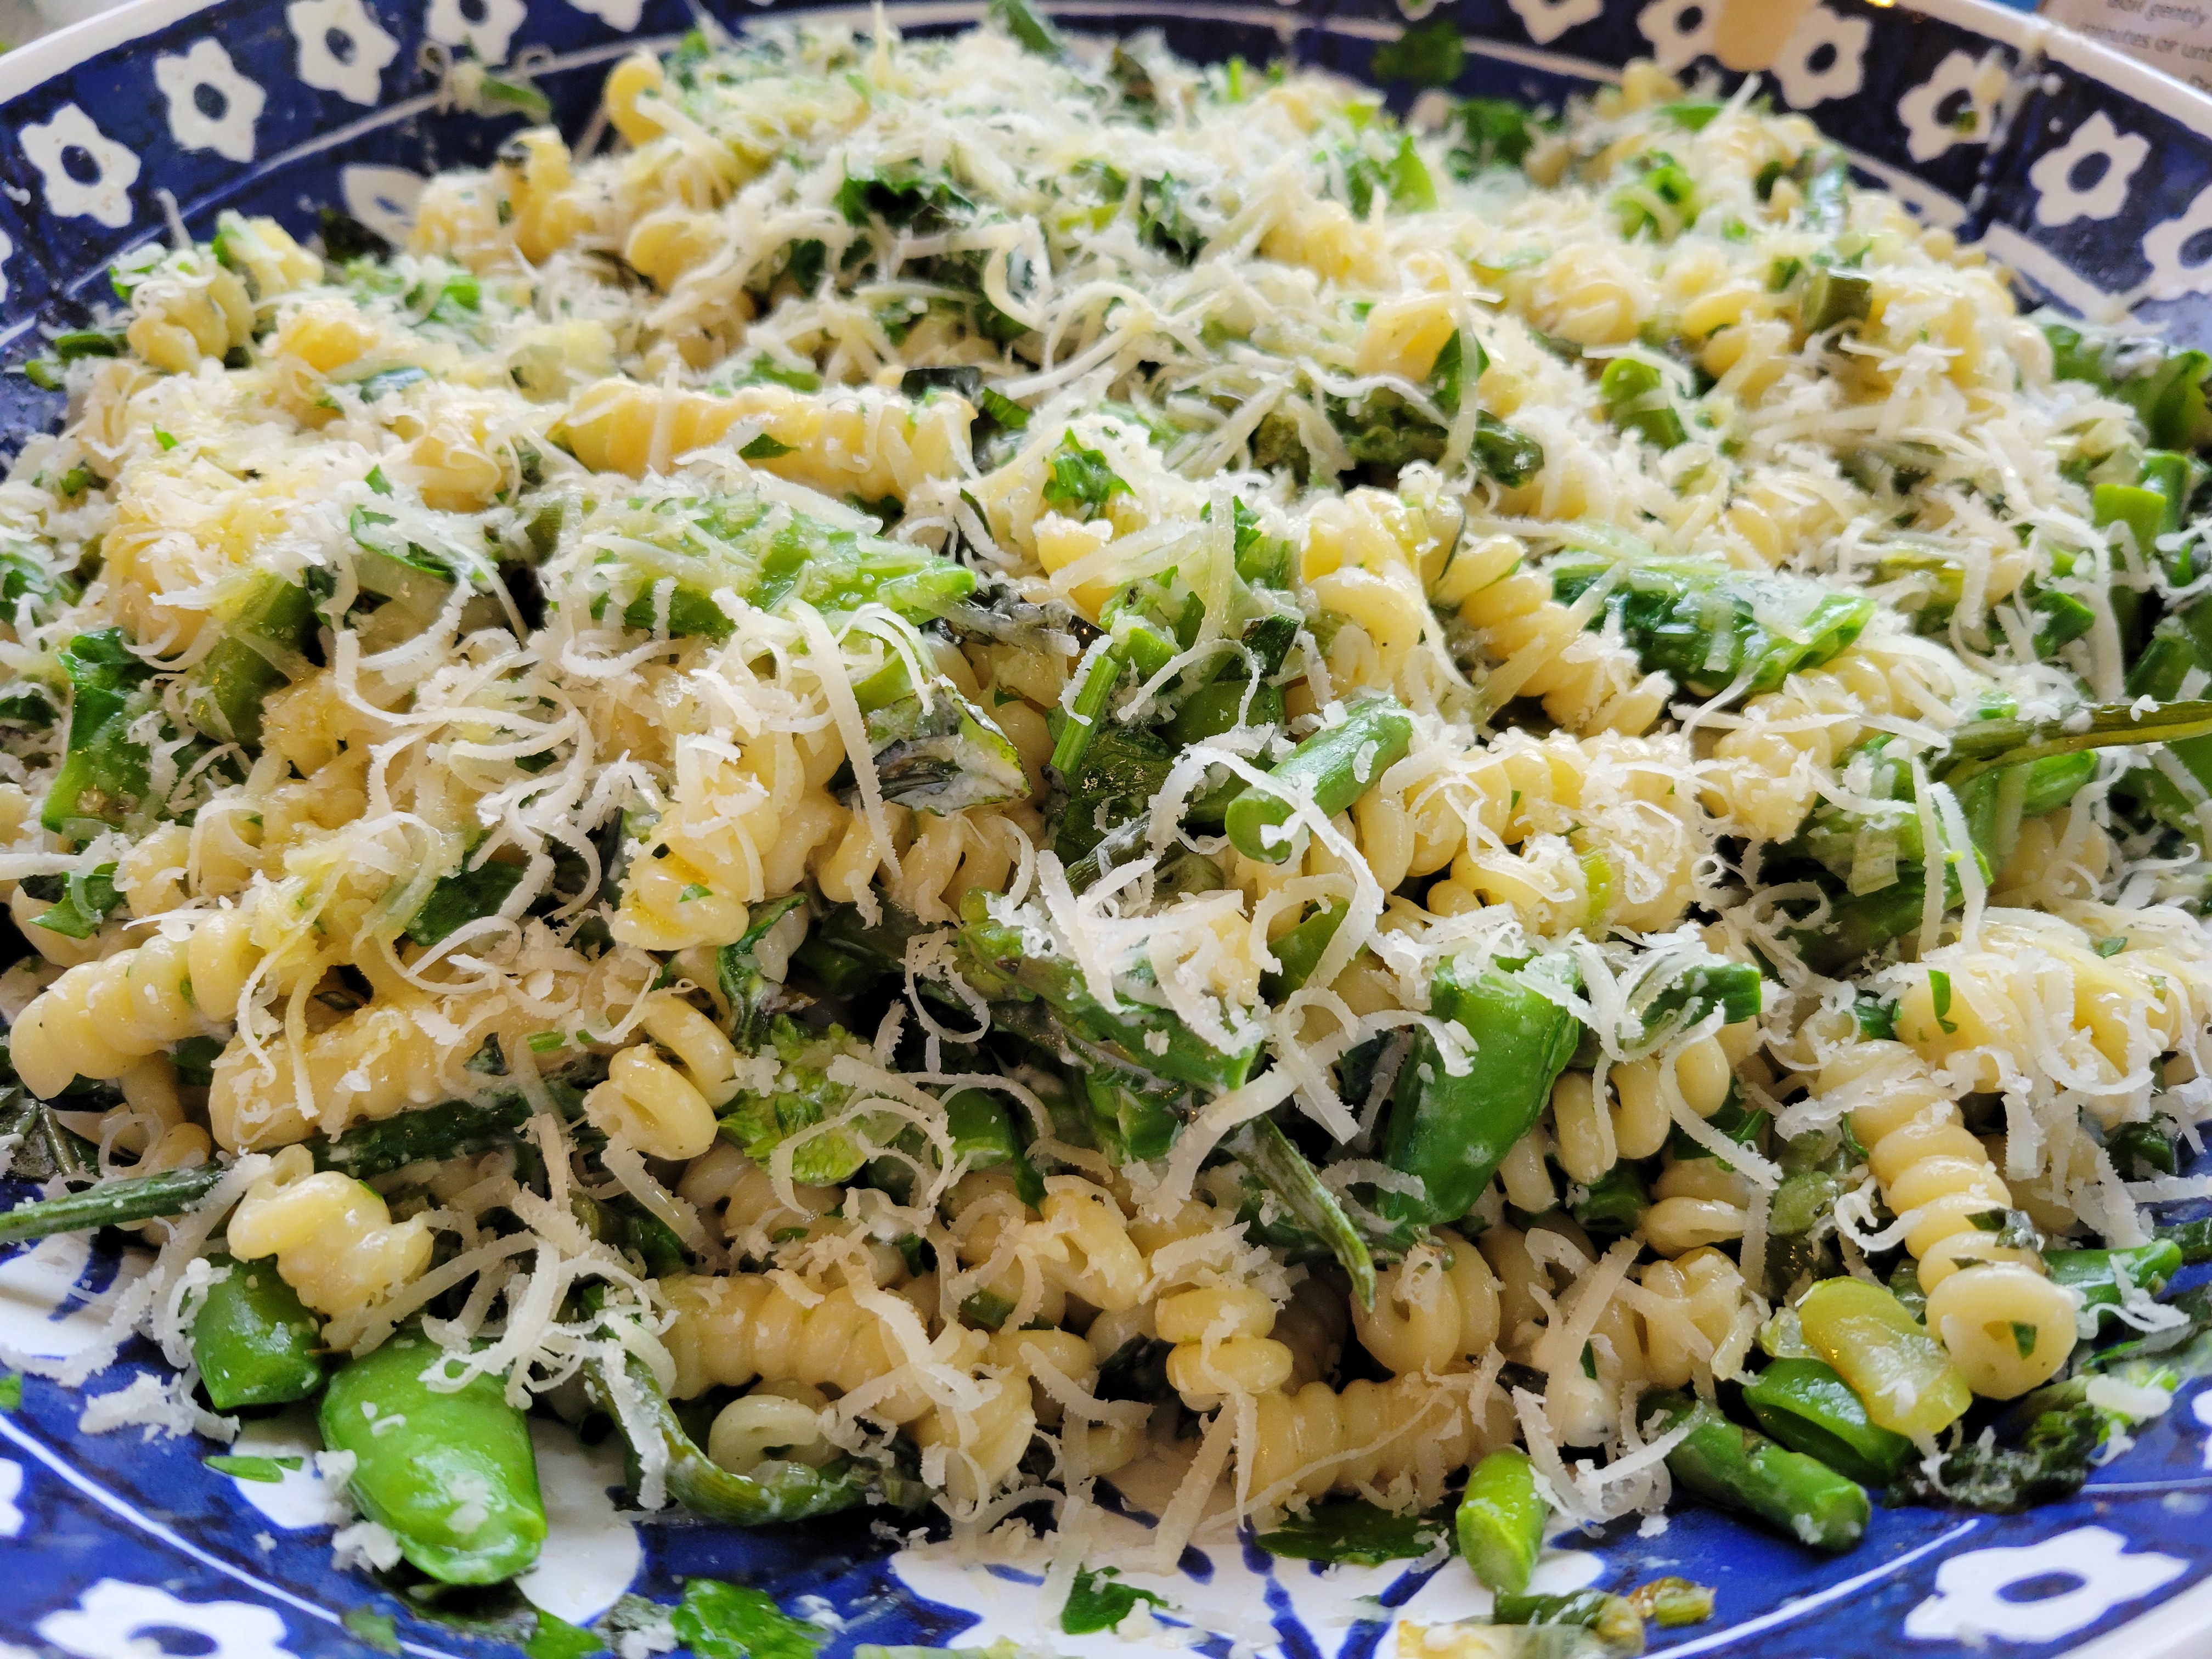 photo of a large serving bowl full of curly pasta with green vegetables and cheese